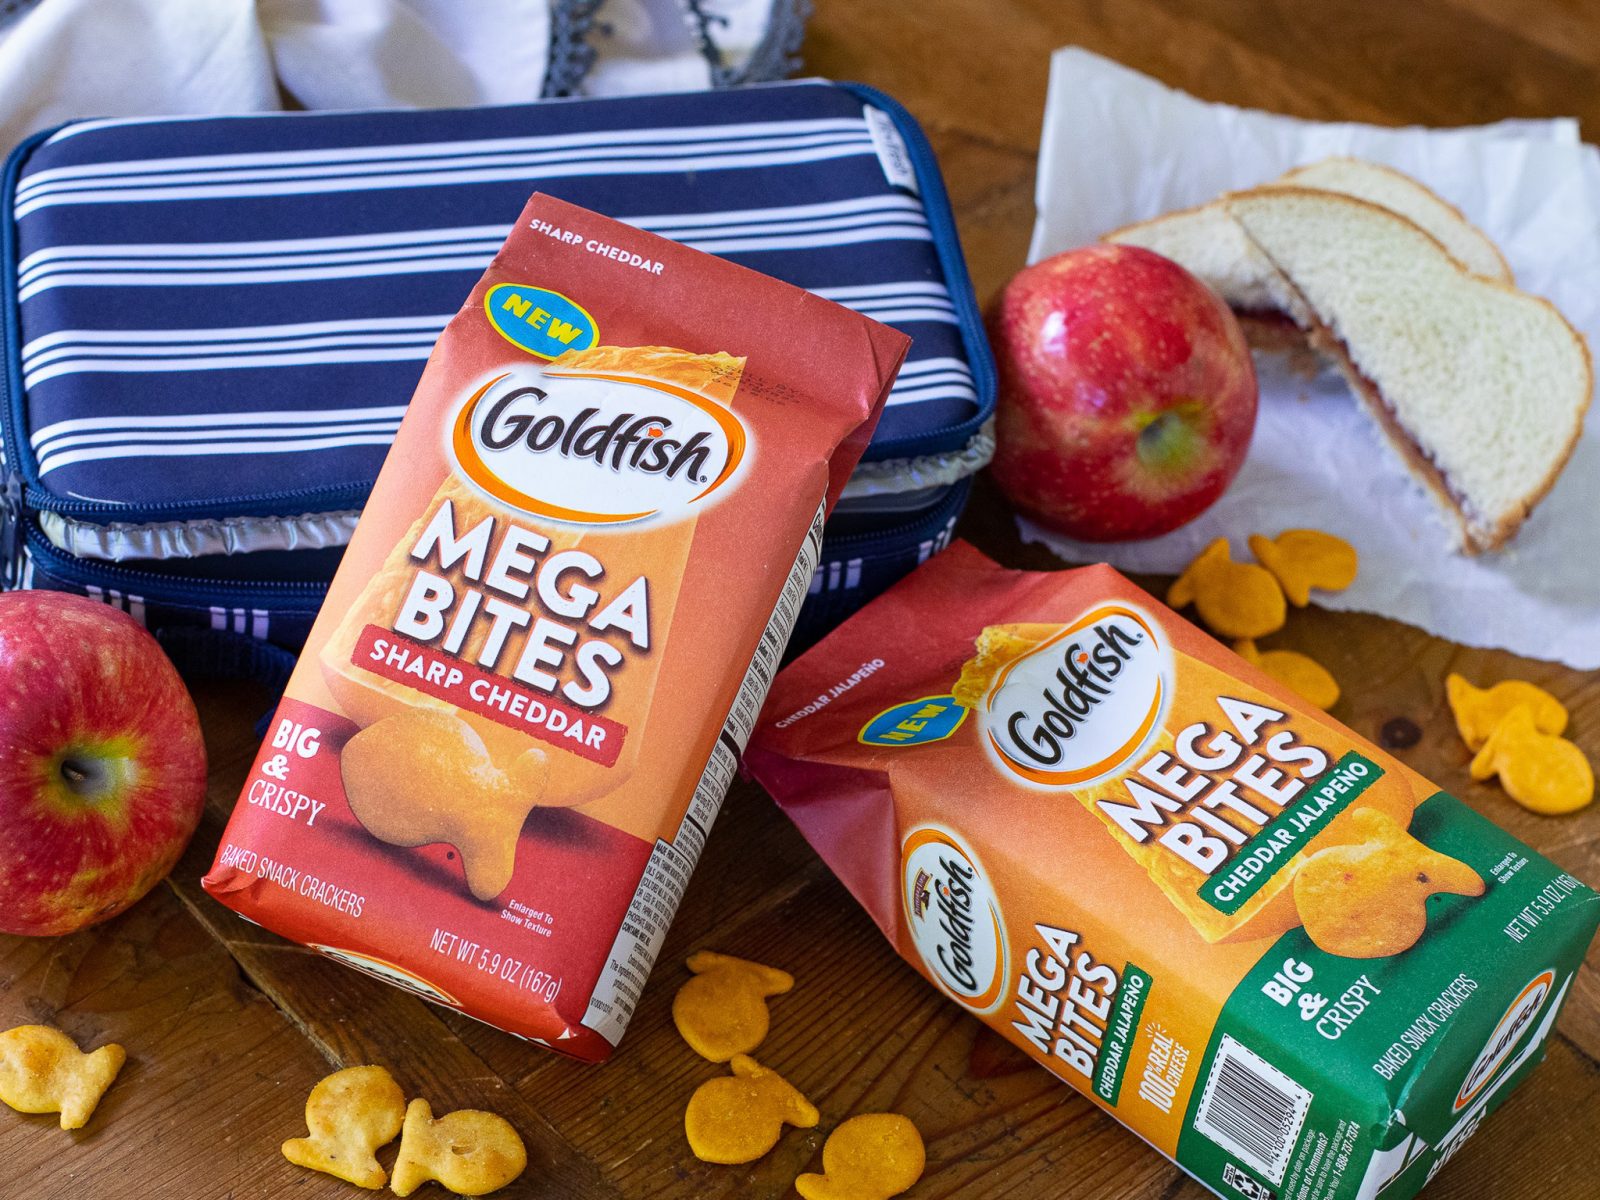 Load Your Coupon For FREE Goldfish® Mega Bites At Publix – Clip Today ONLY!